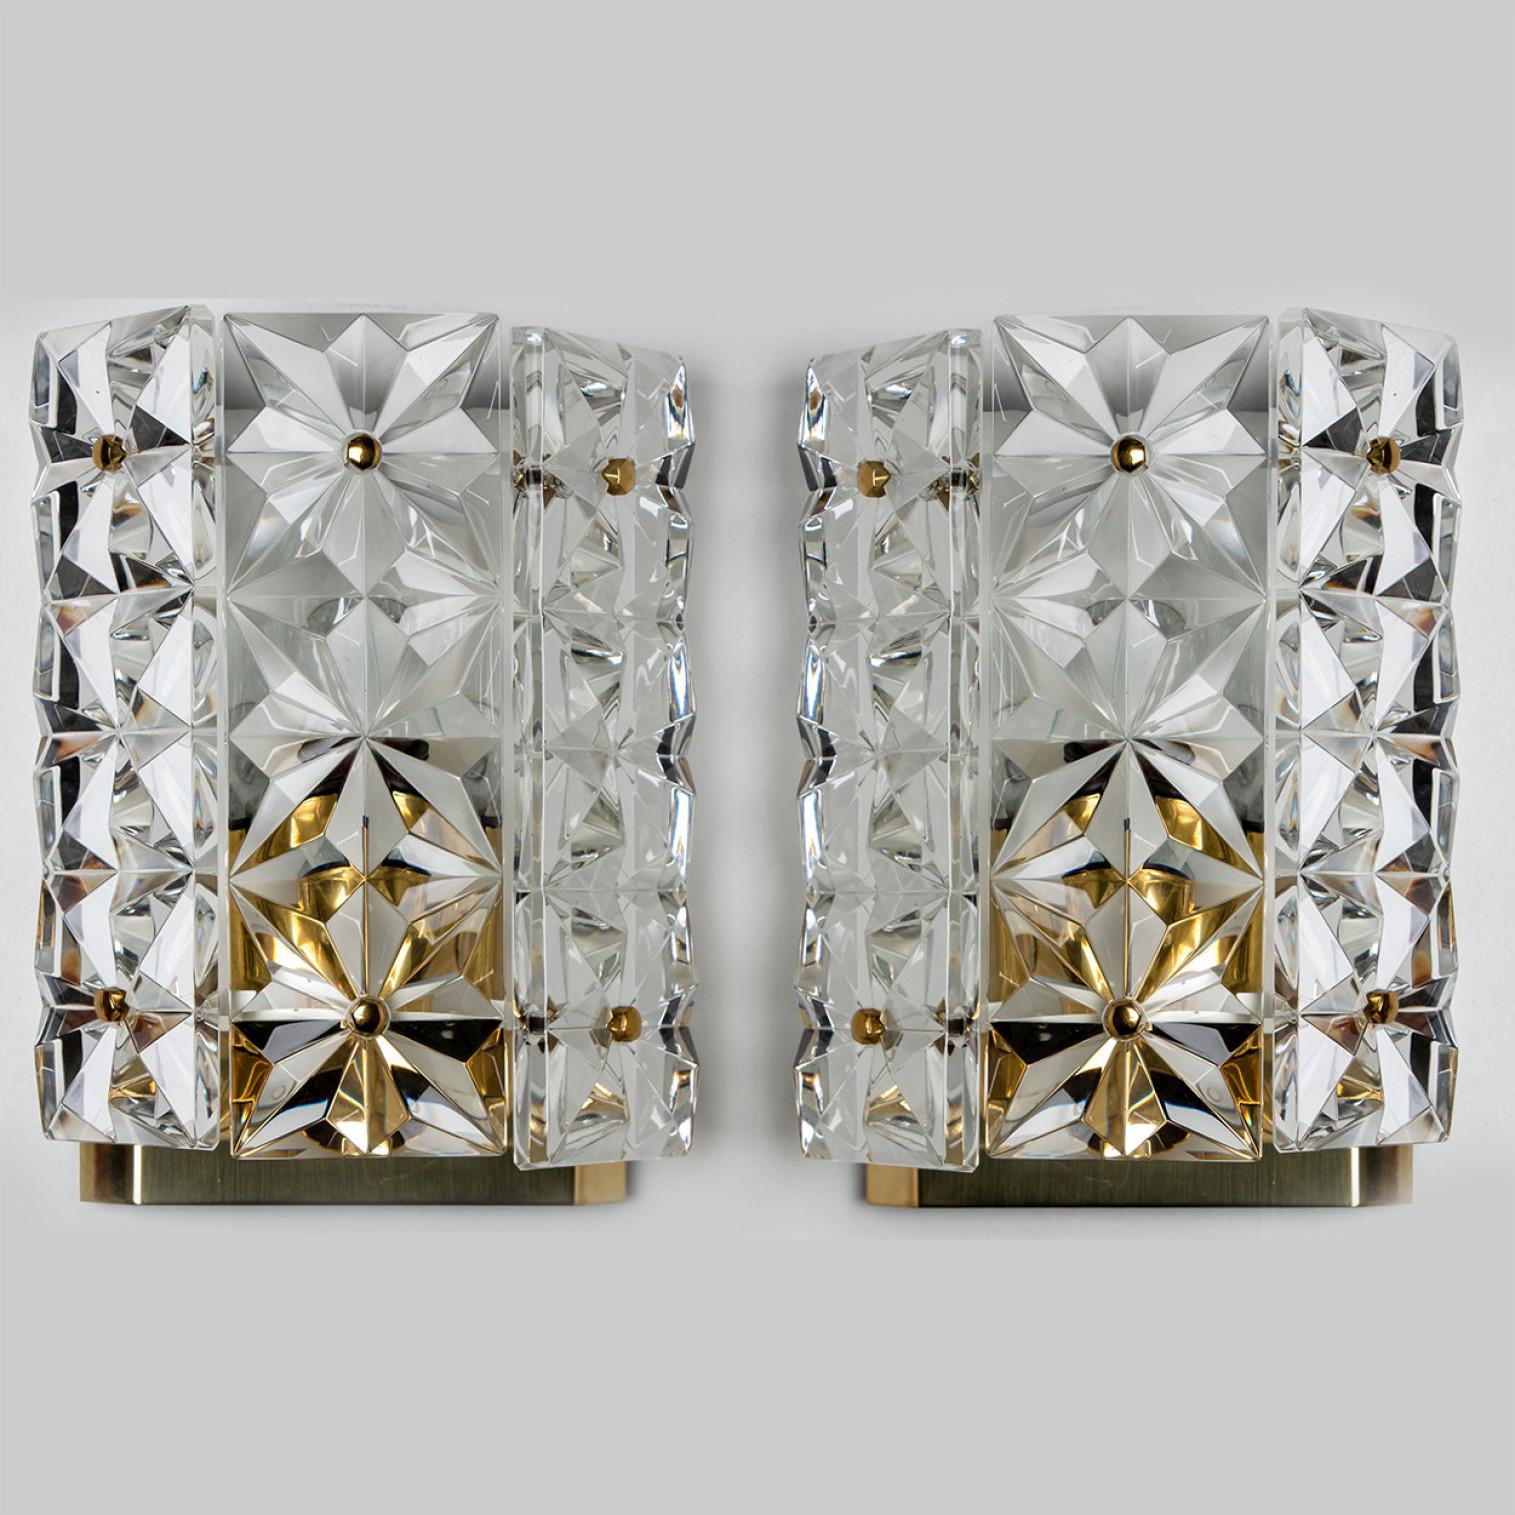 Mid-Century Modern Crystal Glass and Brass Wall Sconces by Kinkeldey, 1970s For Sale